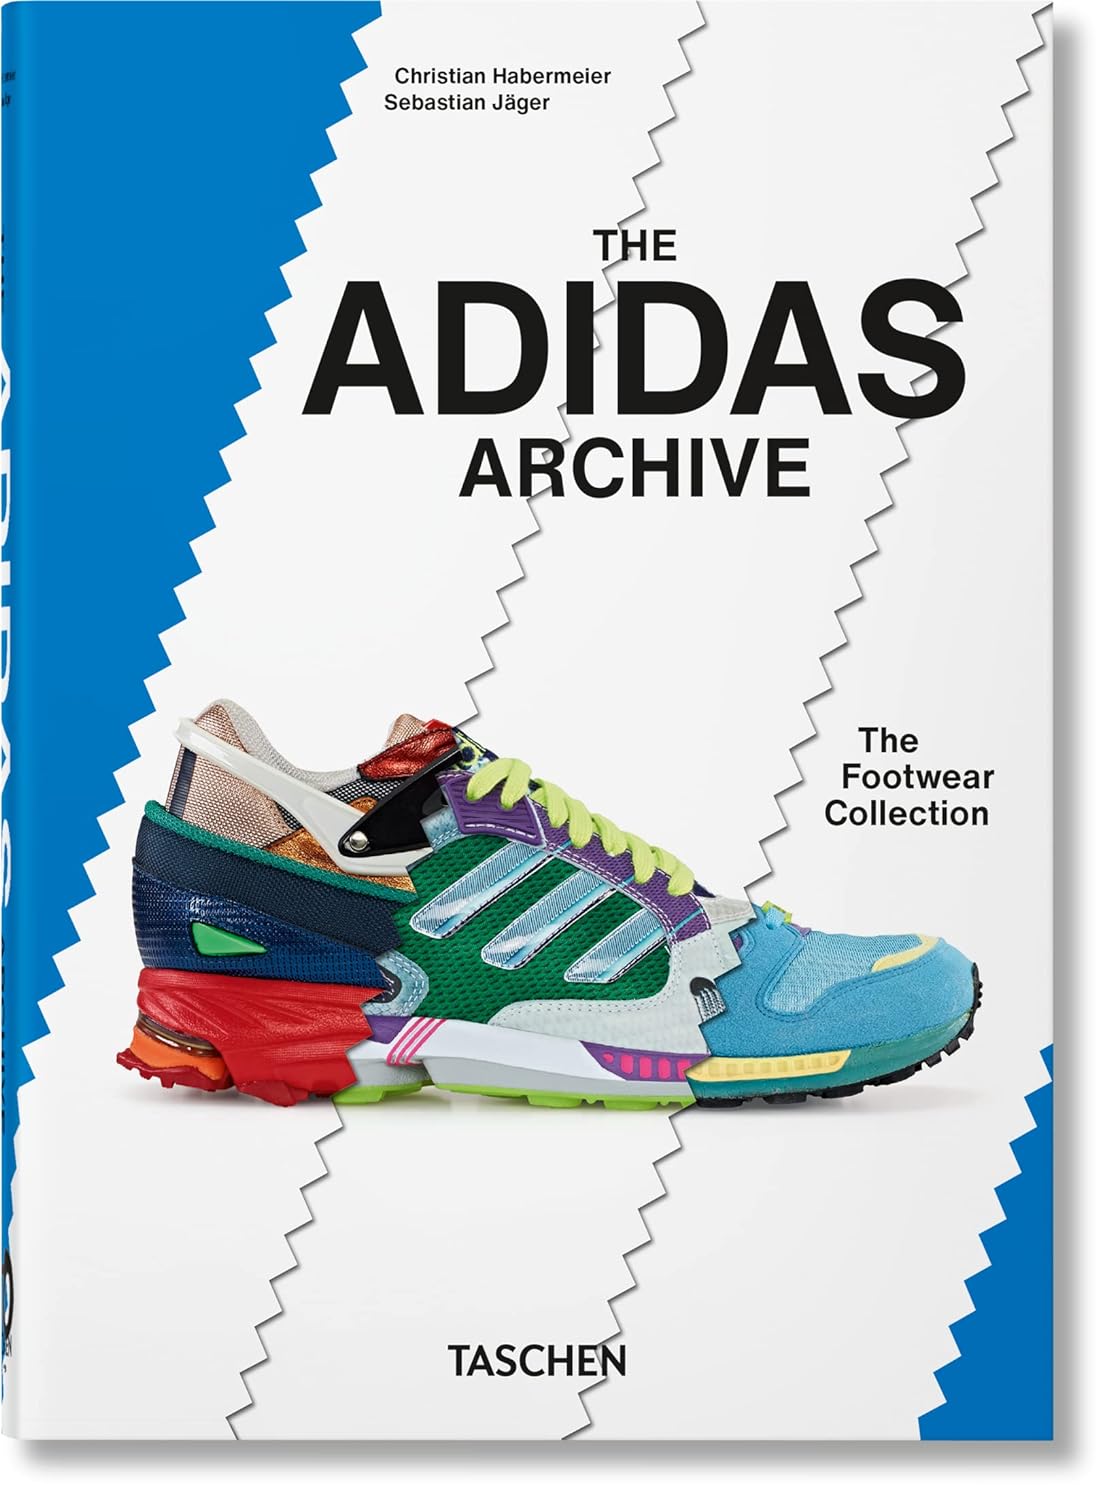 adidas 0044 02a The Adidas Archive. The Footwear Collection (40th Anniversary Edition)